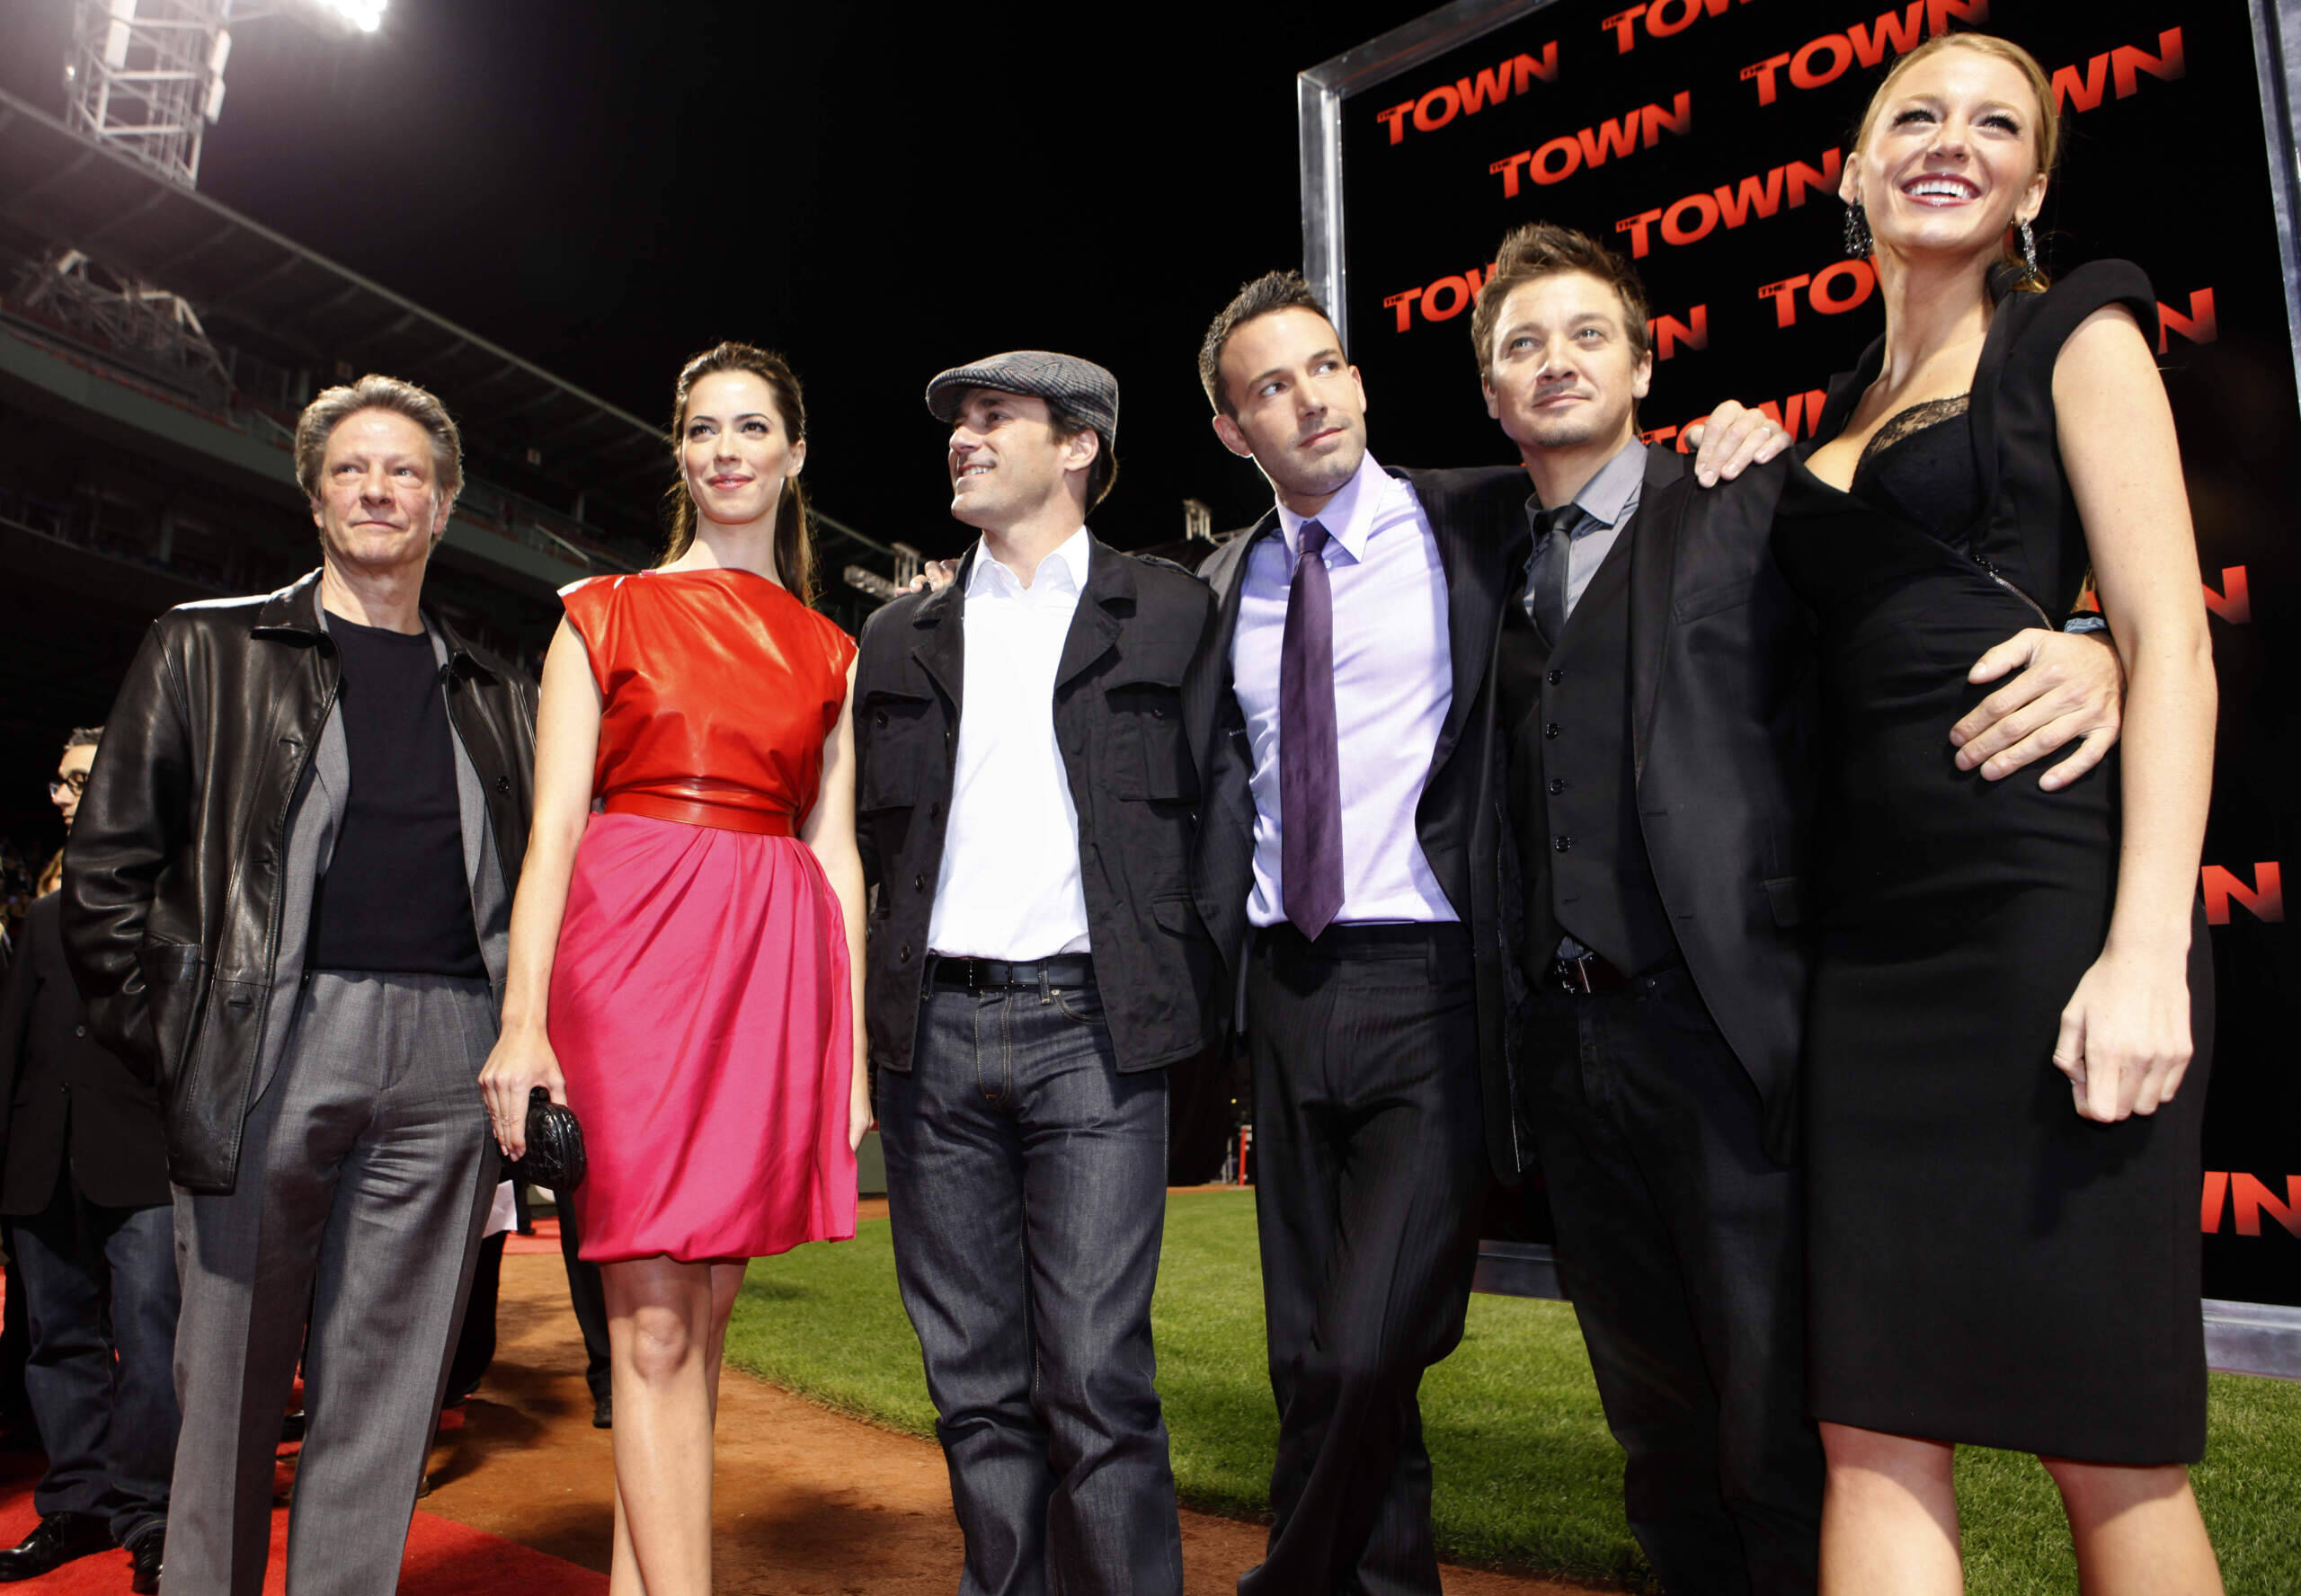 The cast of &quot;The Town&quot; — from left, Chris Cooper, Rebecca Hall, John Hamm, Ben Affleck, Jeremy Renner and Blake Lively — pose at the premiere of the film at Fenway Park in Boston on Sept. 14, 2010. (Michael Dwyer/AP)